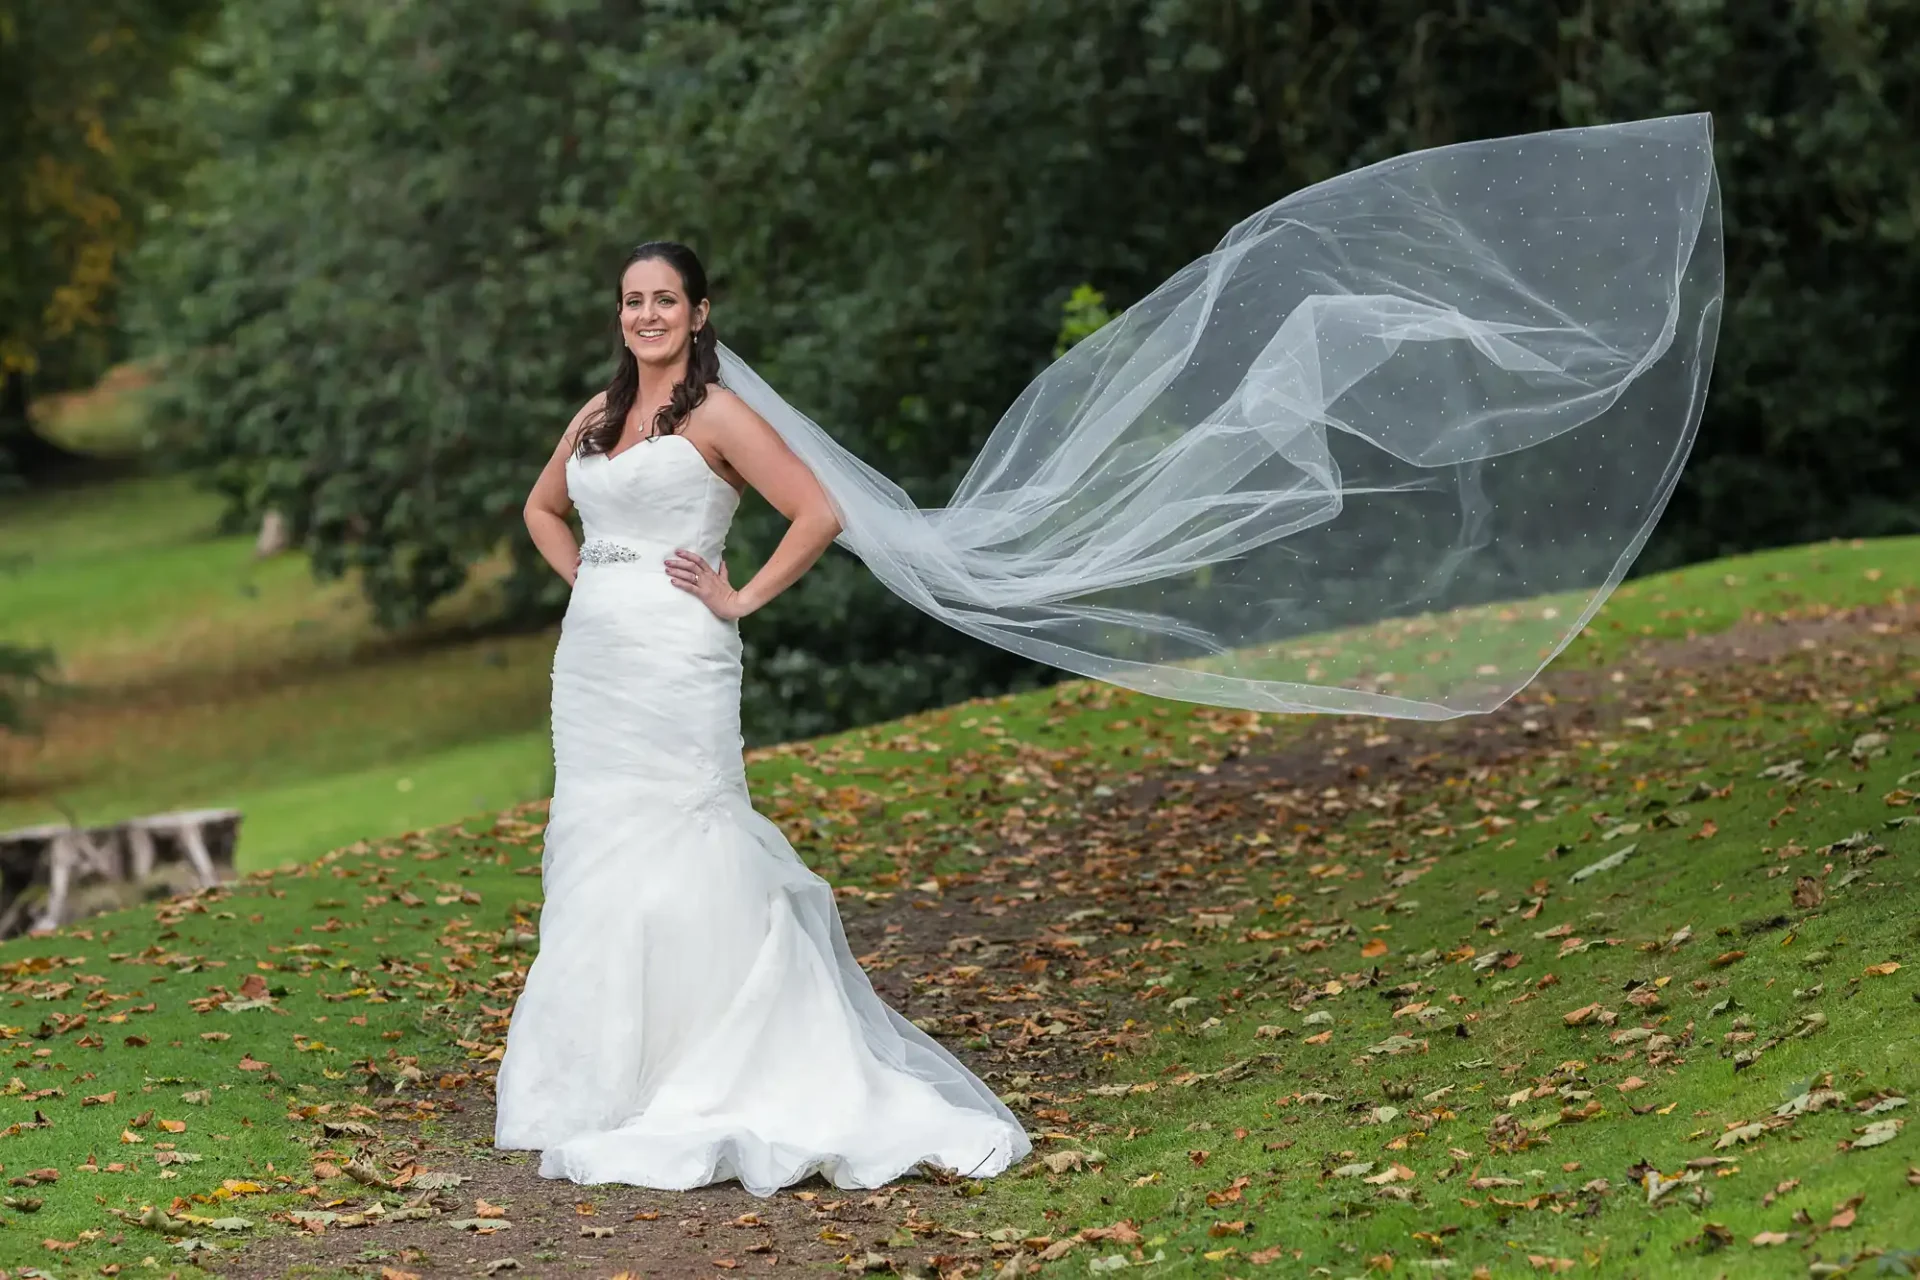 A bride in a strapless white gown stands on a grassy slope, smiling, with her long veil blowing in the wind.